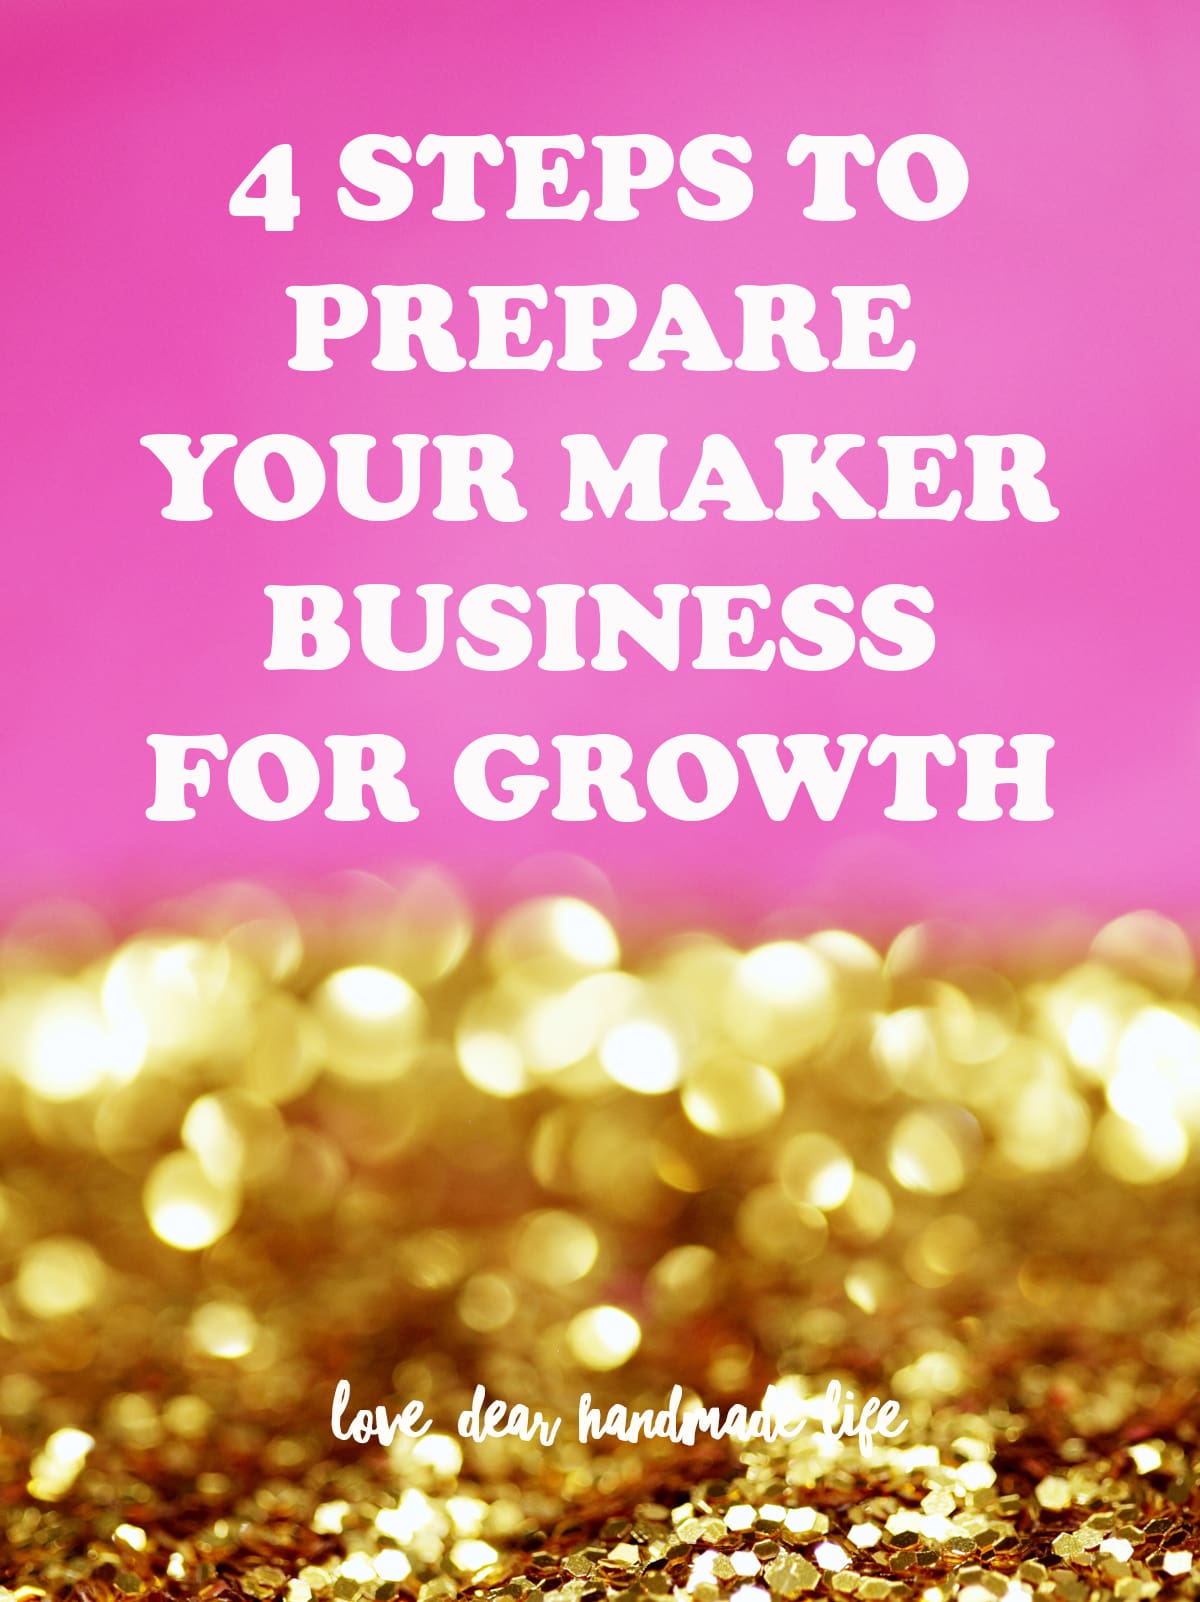 4 steps to prepare your maker business for growth Dear Handmade Life